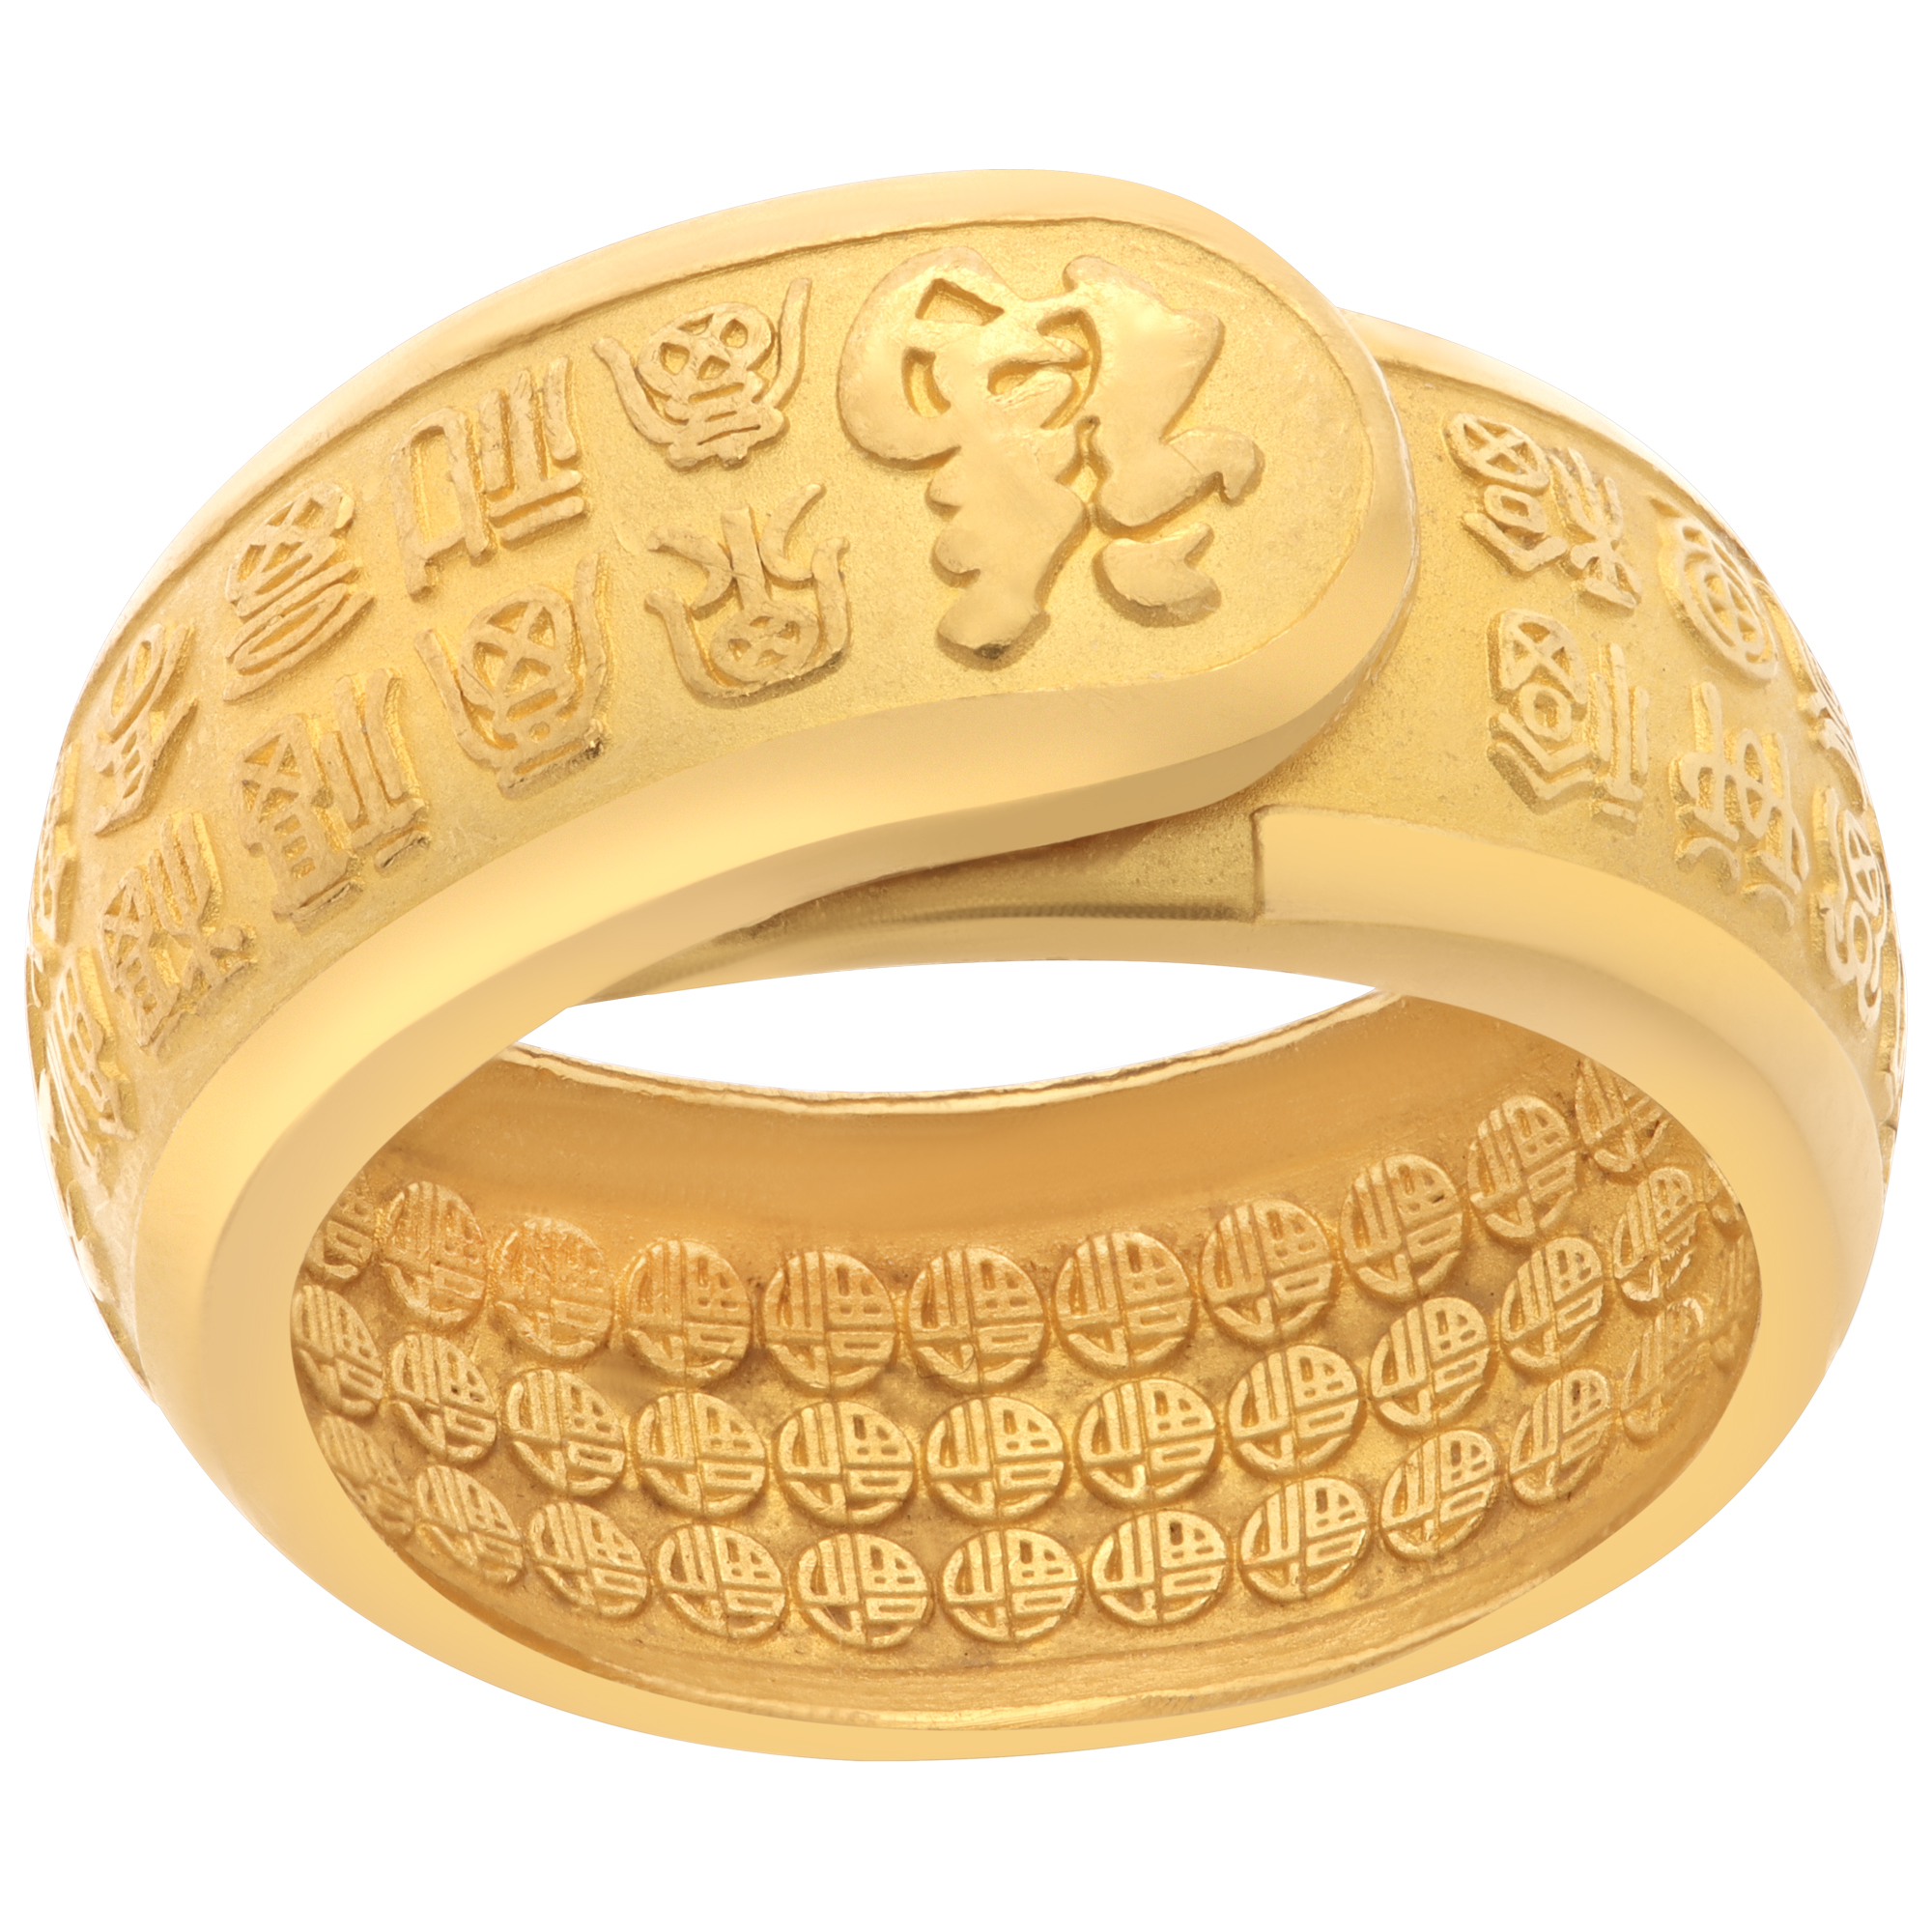 Infinite Blessings 999 pure gold ring in 24k yellow gold